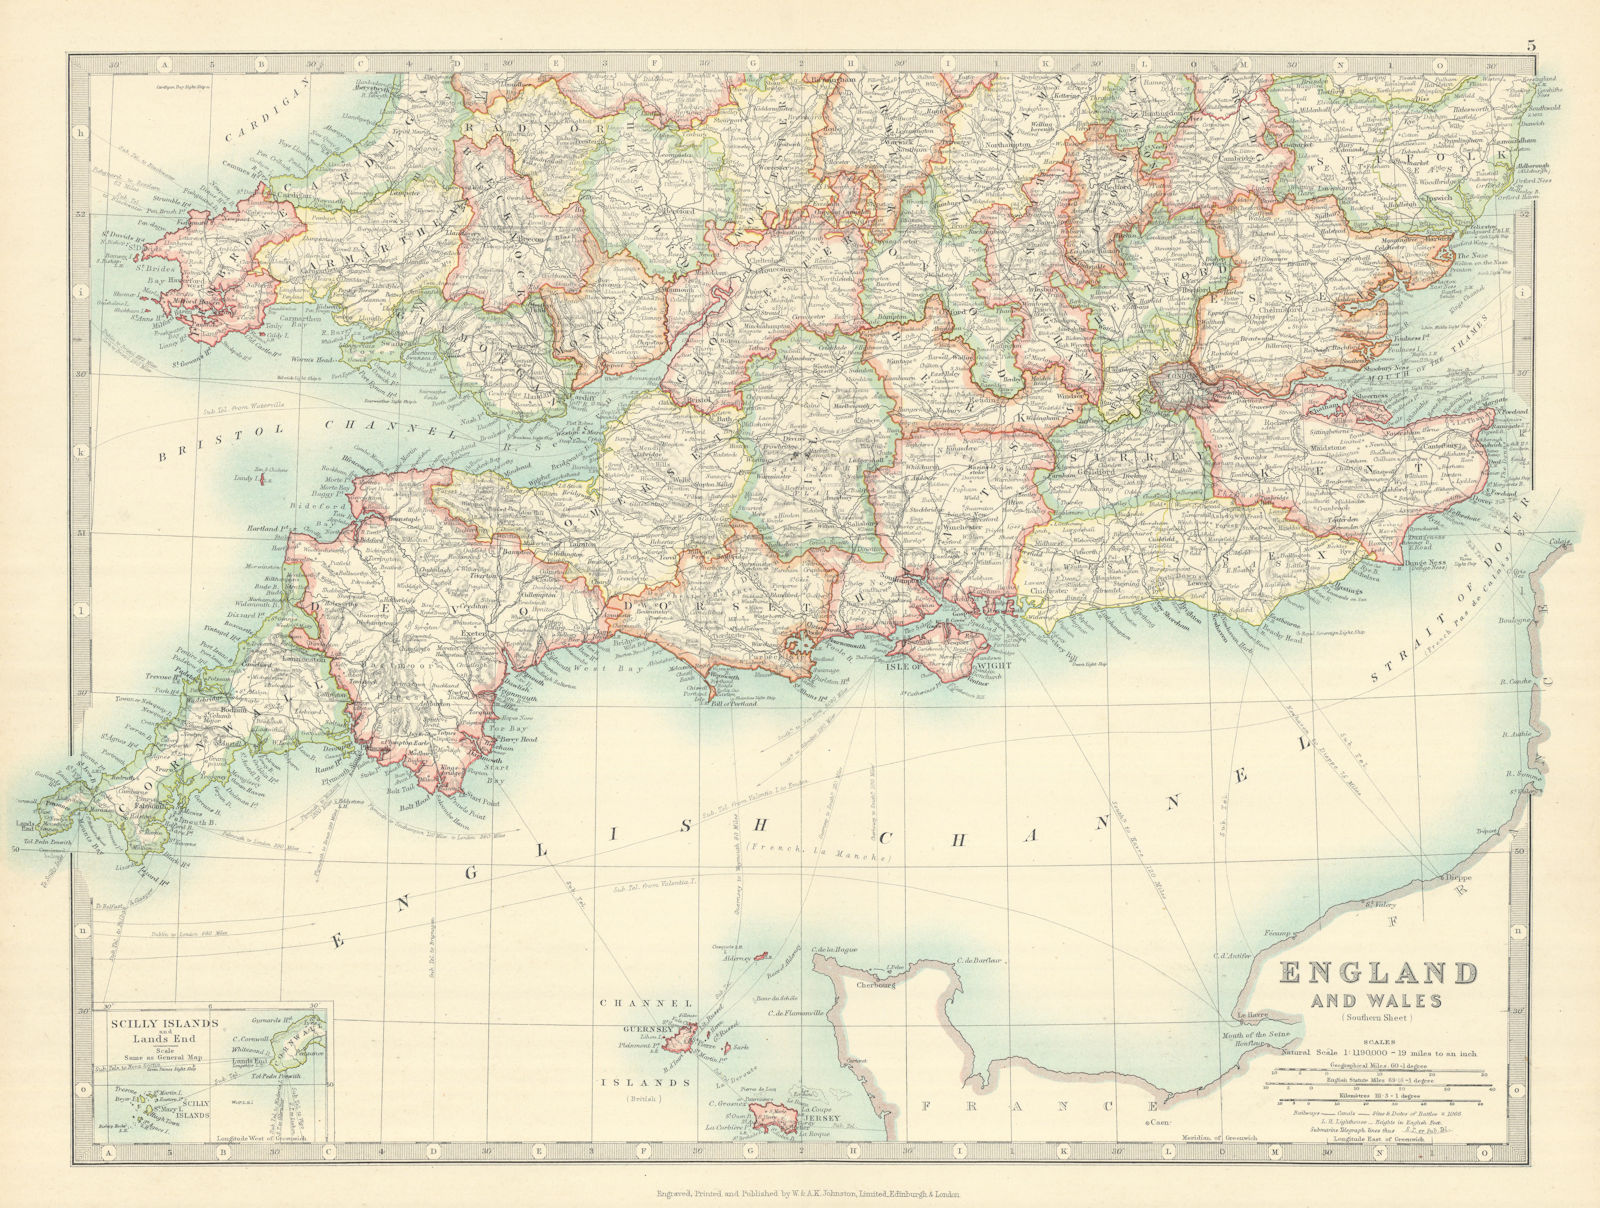 SOUTHERN ENGLAND & WALES. Shows Worcestershire enclaves. JOHNSTON 1913 old map